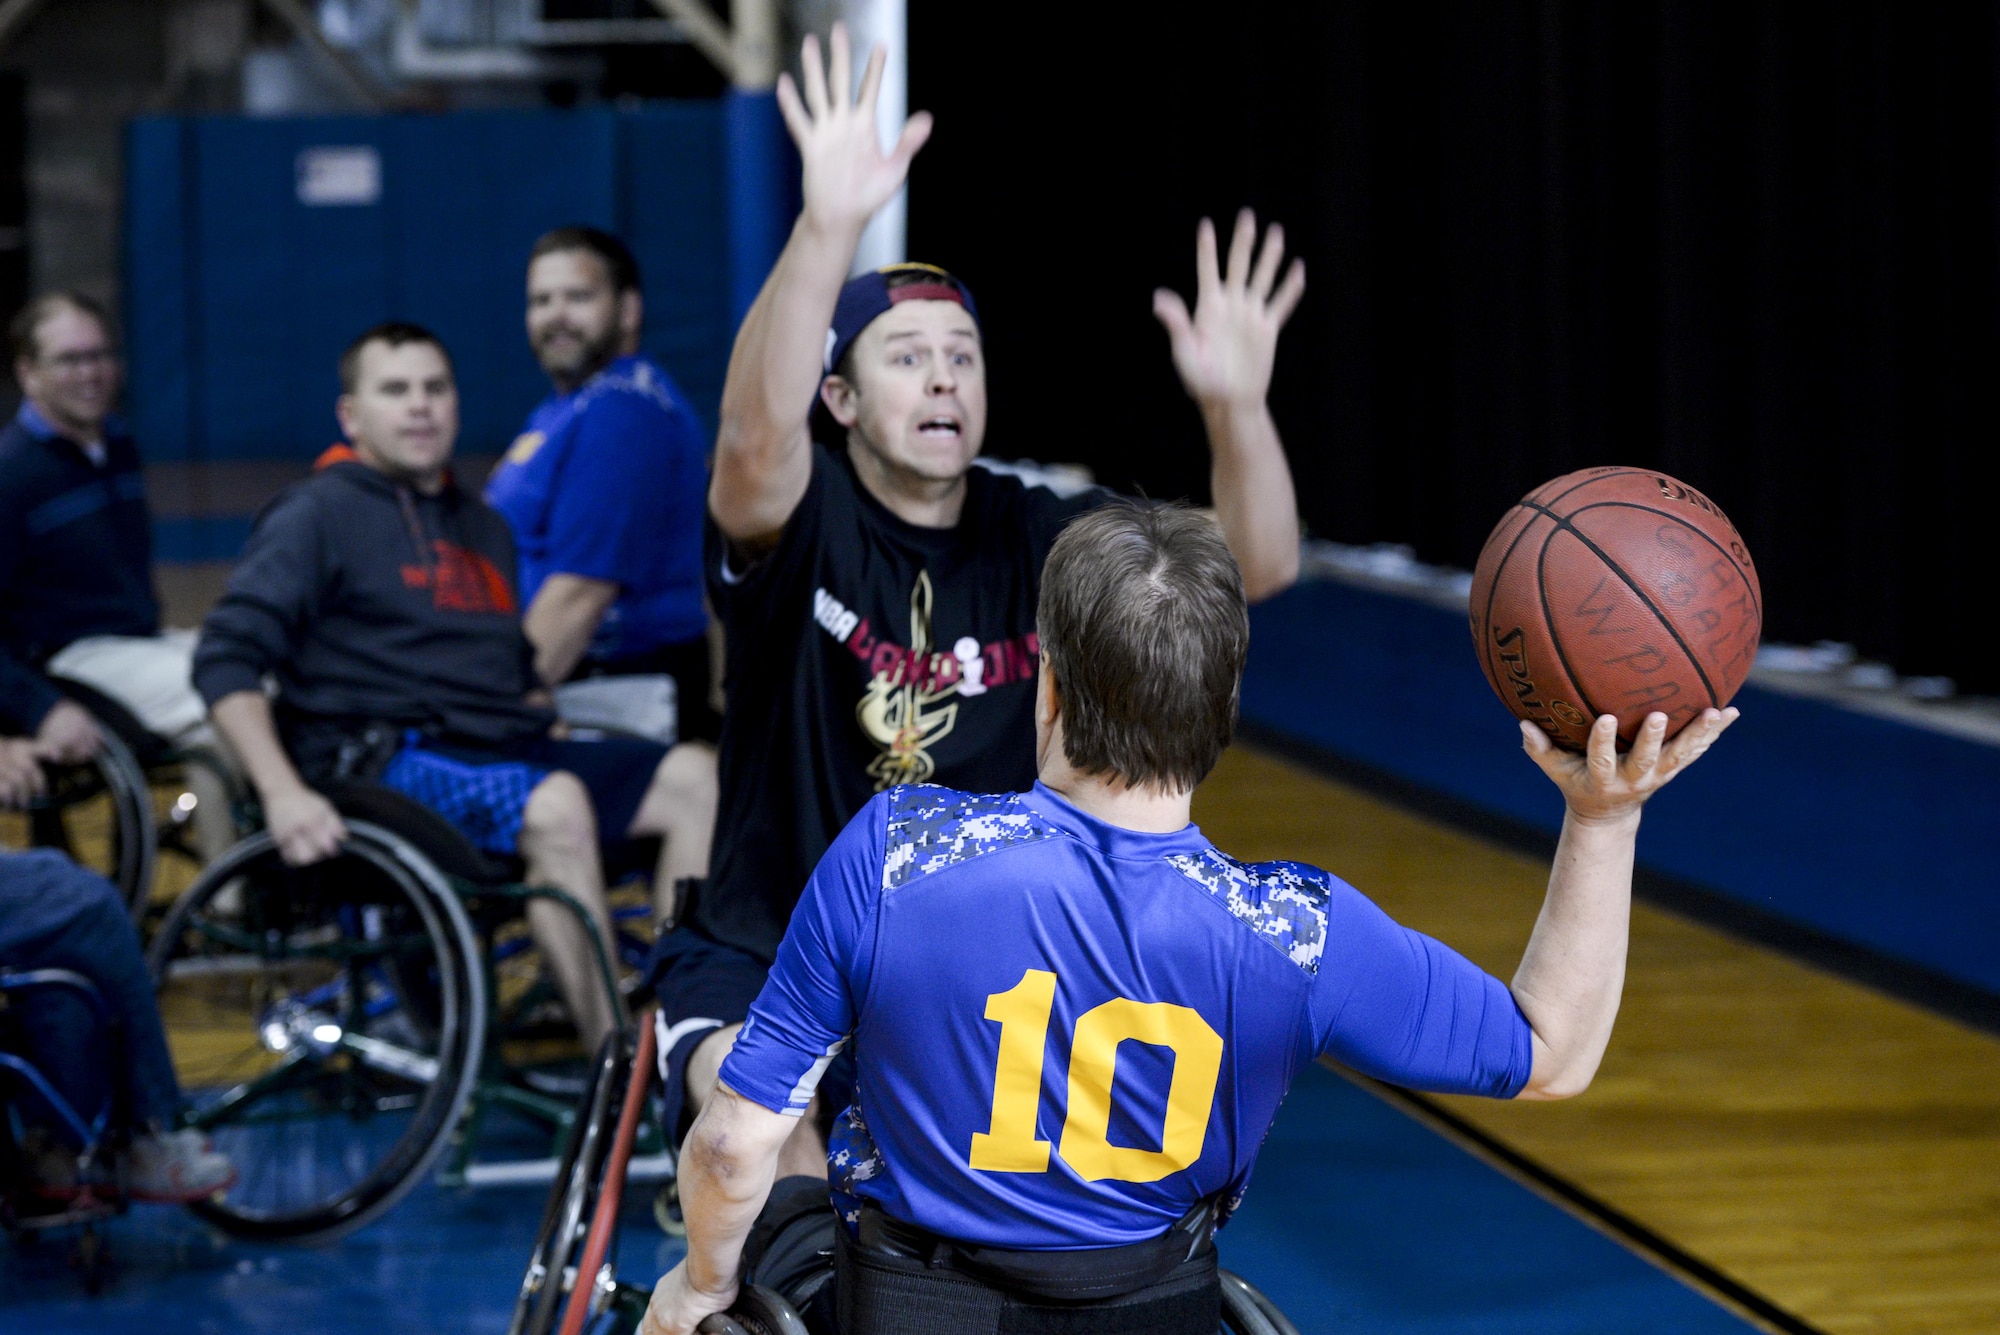 Phil Hogue, from Nephi, Utah, brother of Master. Sgt. Samuel Hogue, 445th Security Forces Squadron, attempts to block a pass by Mr. Keith Cable, Air Force Research Laboratory system administrator, during the 2nd annual wheelchair basketball game held as part of the National Disability Awareness Month activities, Oct. 26, at Wright-Patterson Air Force Base. Hogue who was visiting his brother took the opportunity to participate in this awareness month activity to feel what it is like to play this popular sport while bound to a wheelchair. (U.S. Air Force photo/ Wesley Farnsworth)